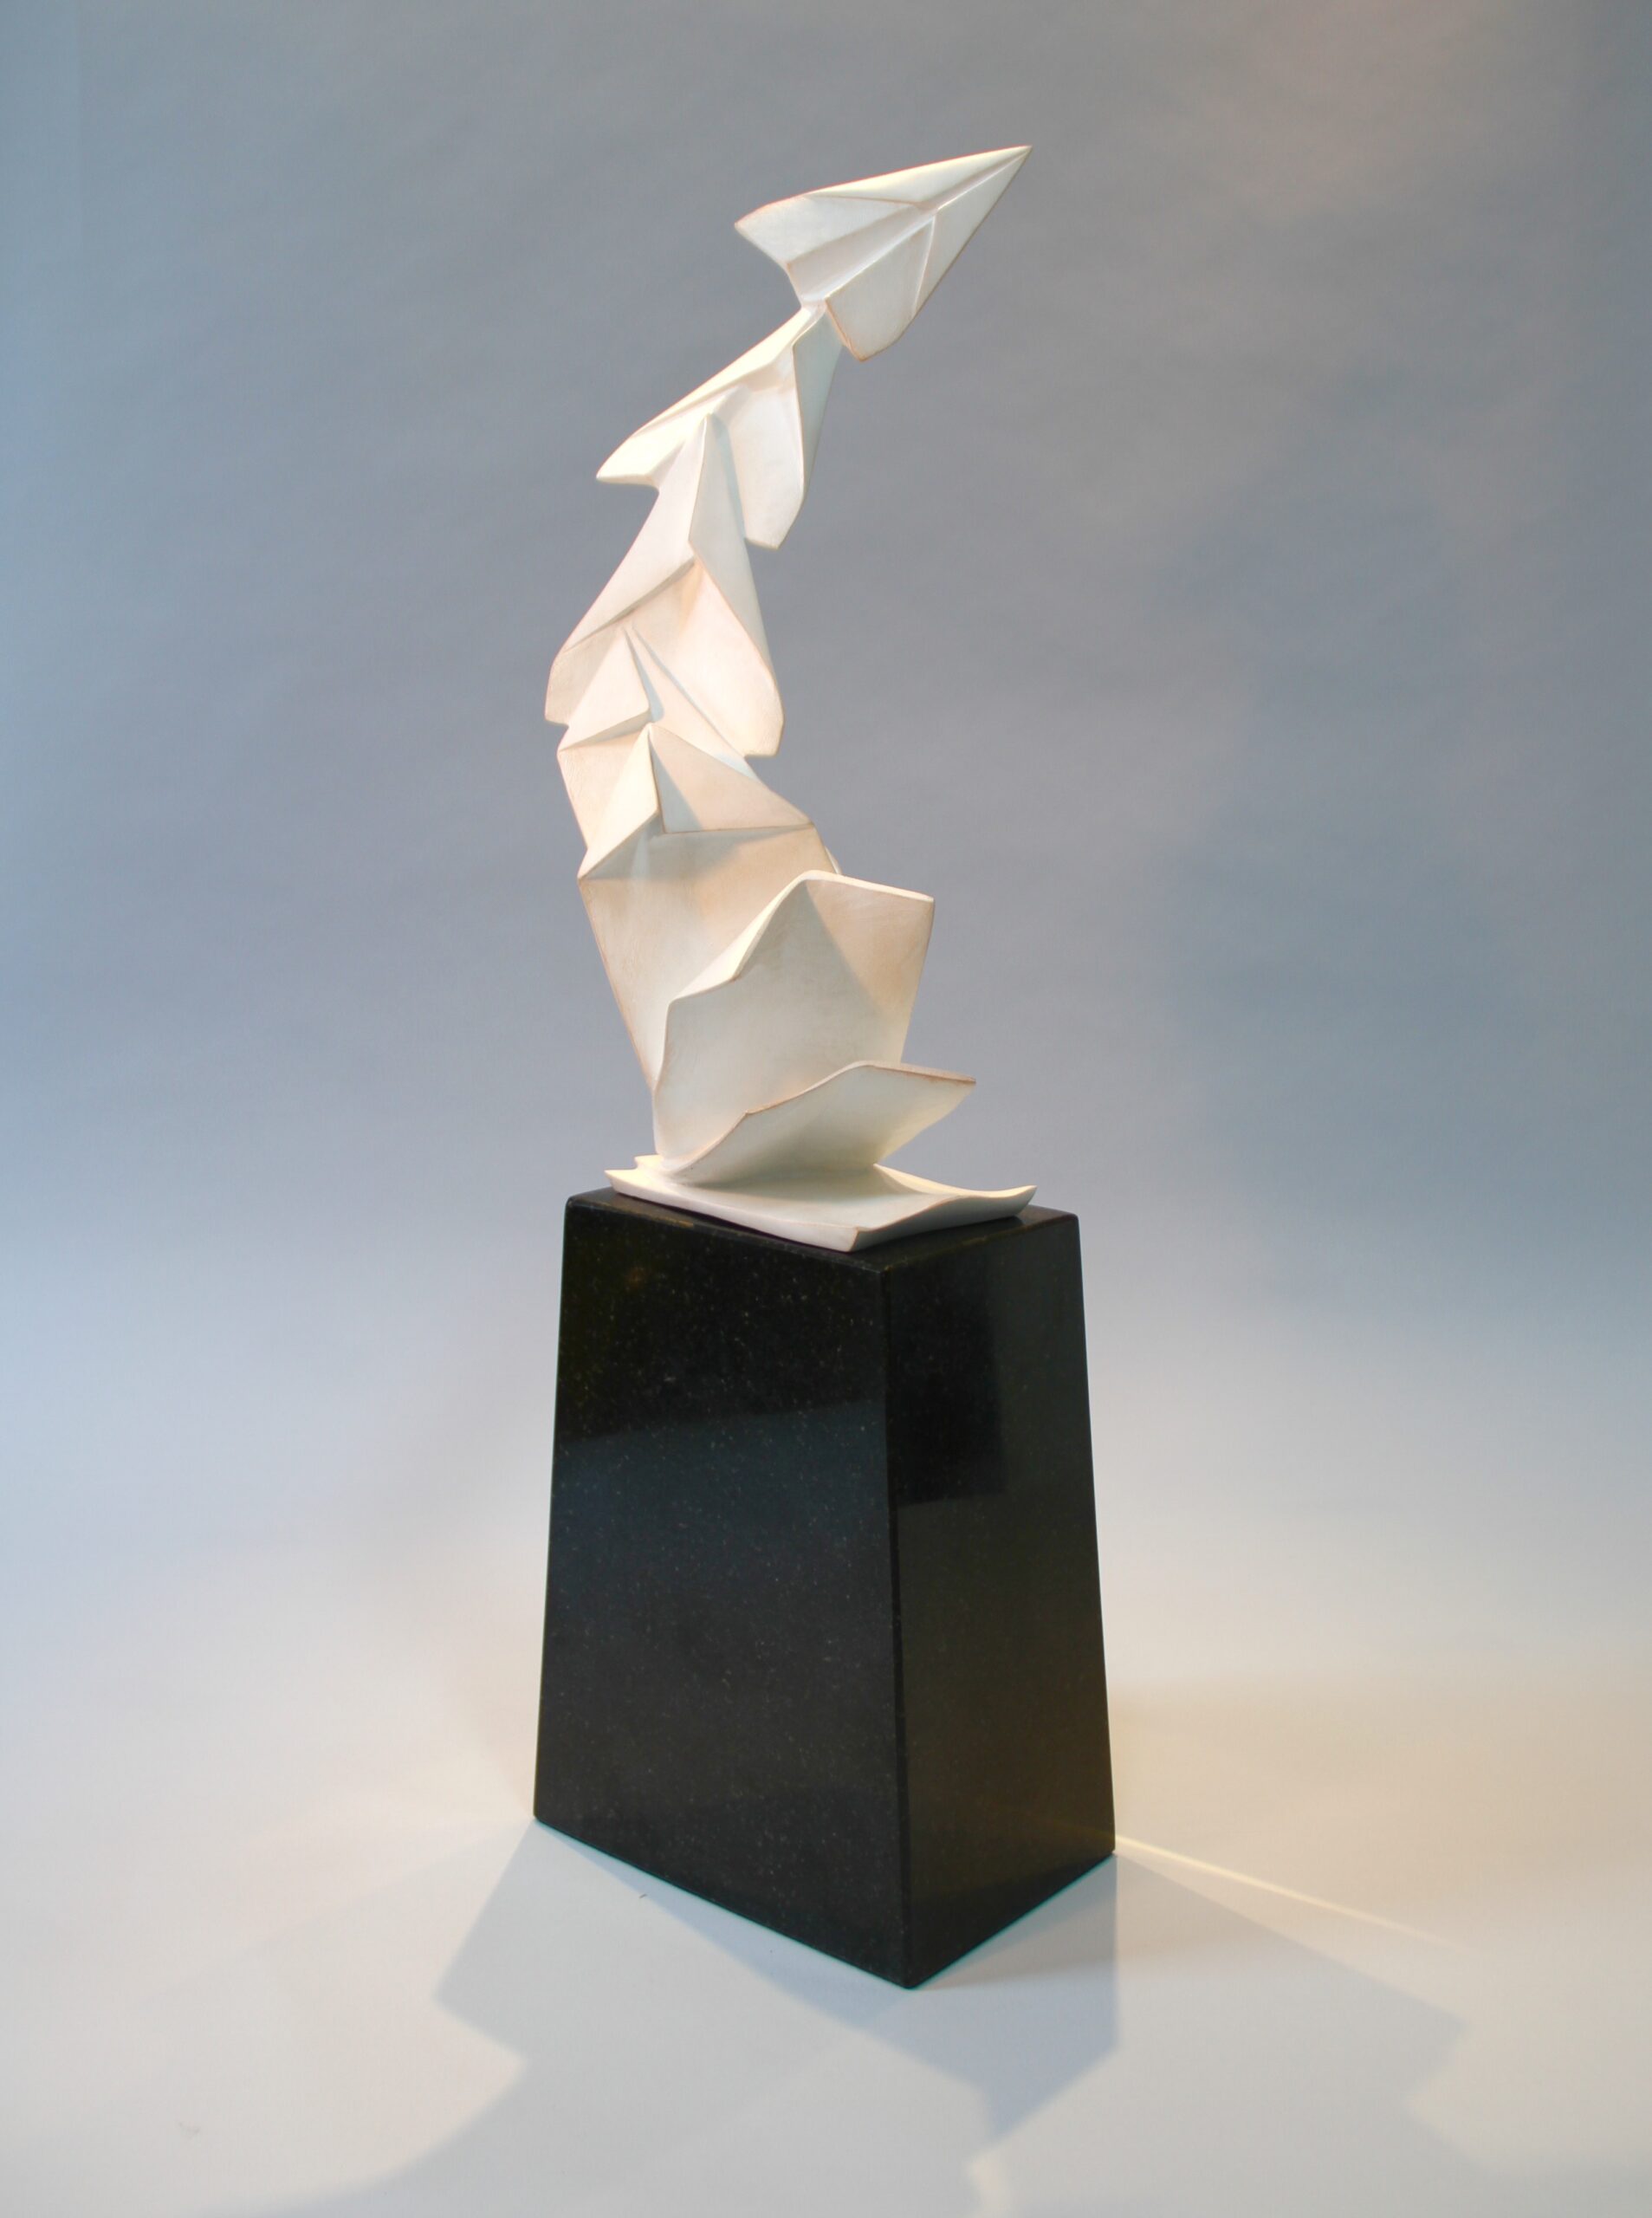 Paper airplane with folds sculpture